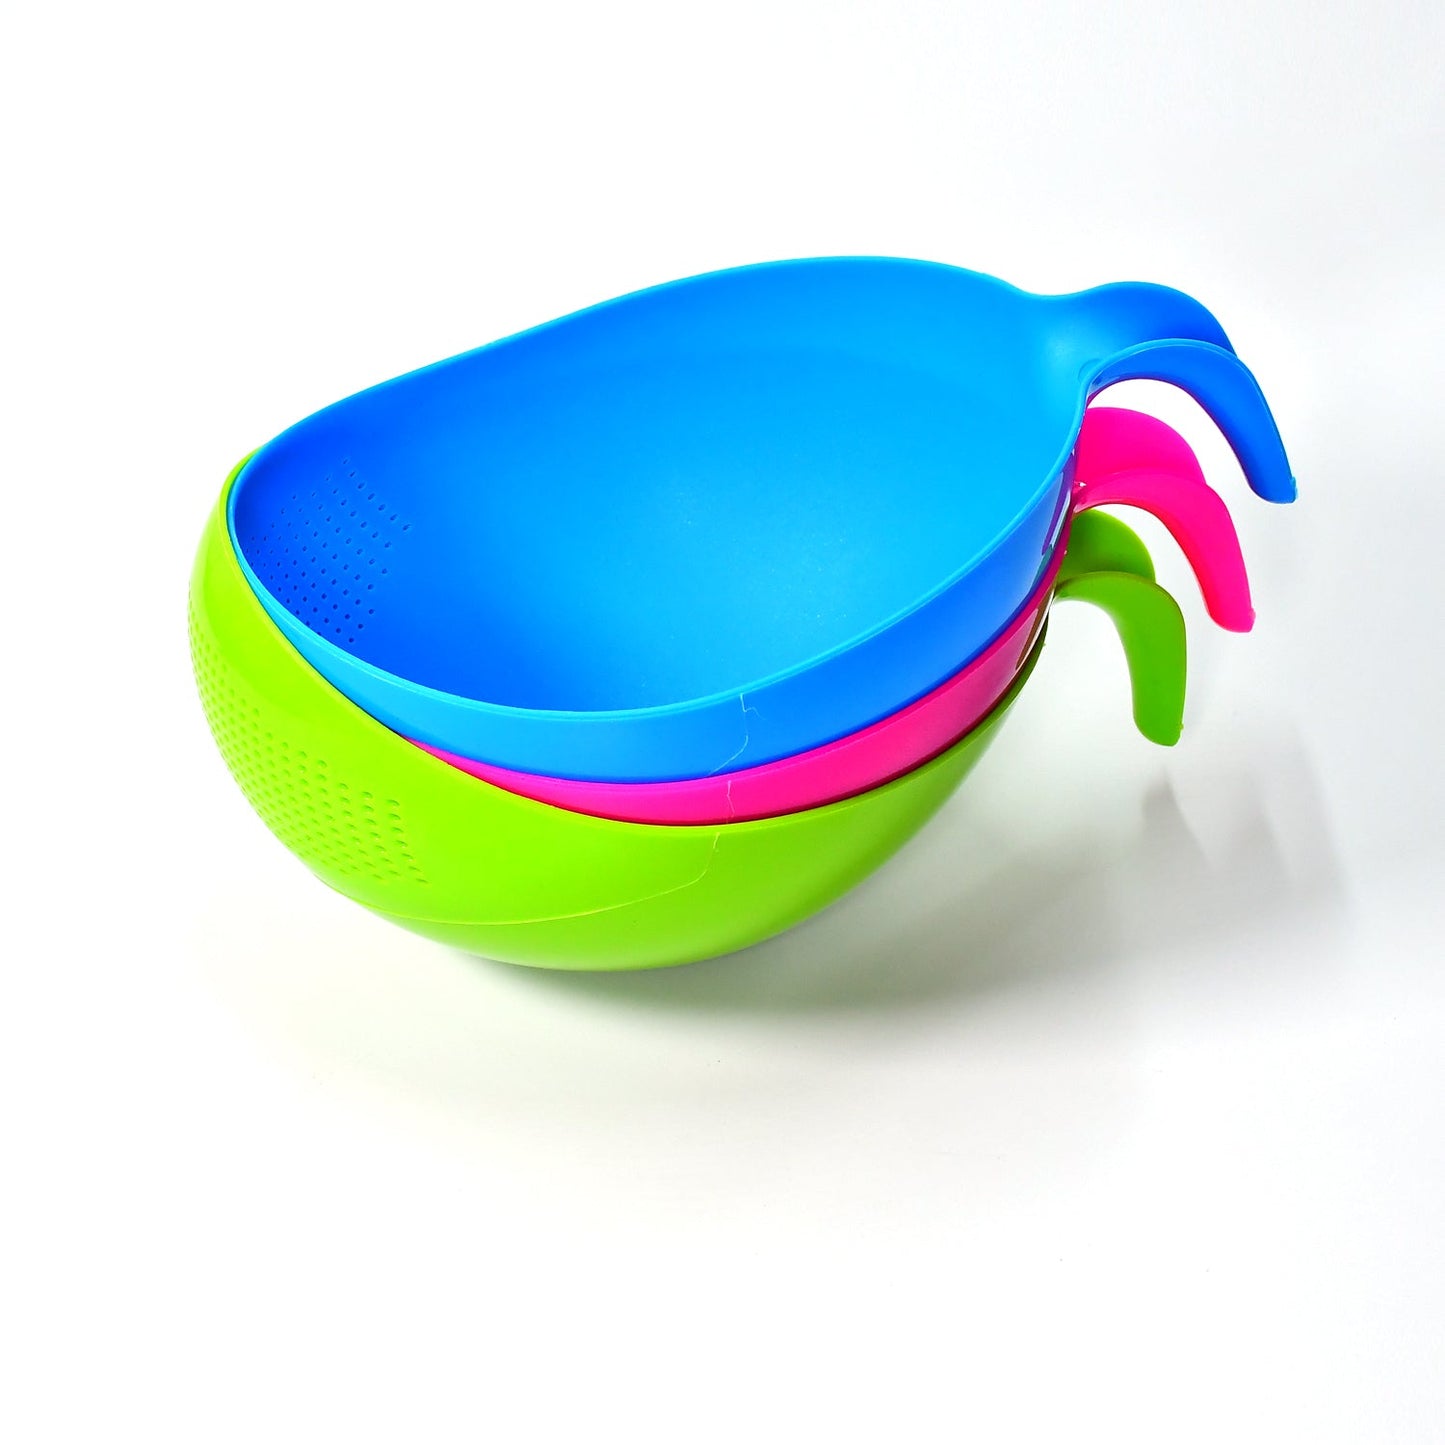 Plastic Rice Bowl Thick Drain Basket with Handle for Rice, Vegetable & Fruit (set of 3pcs)